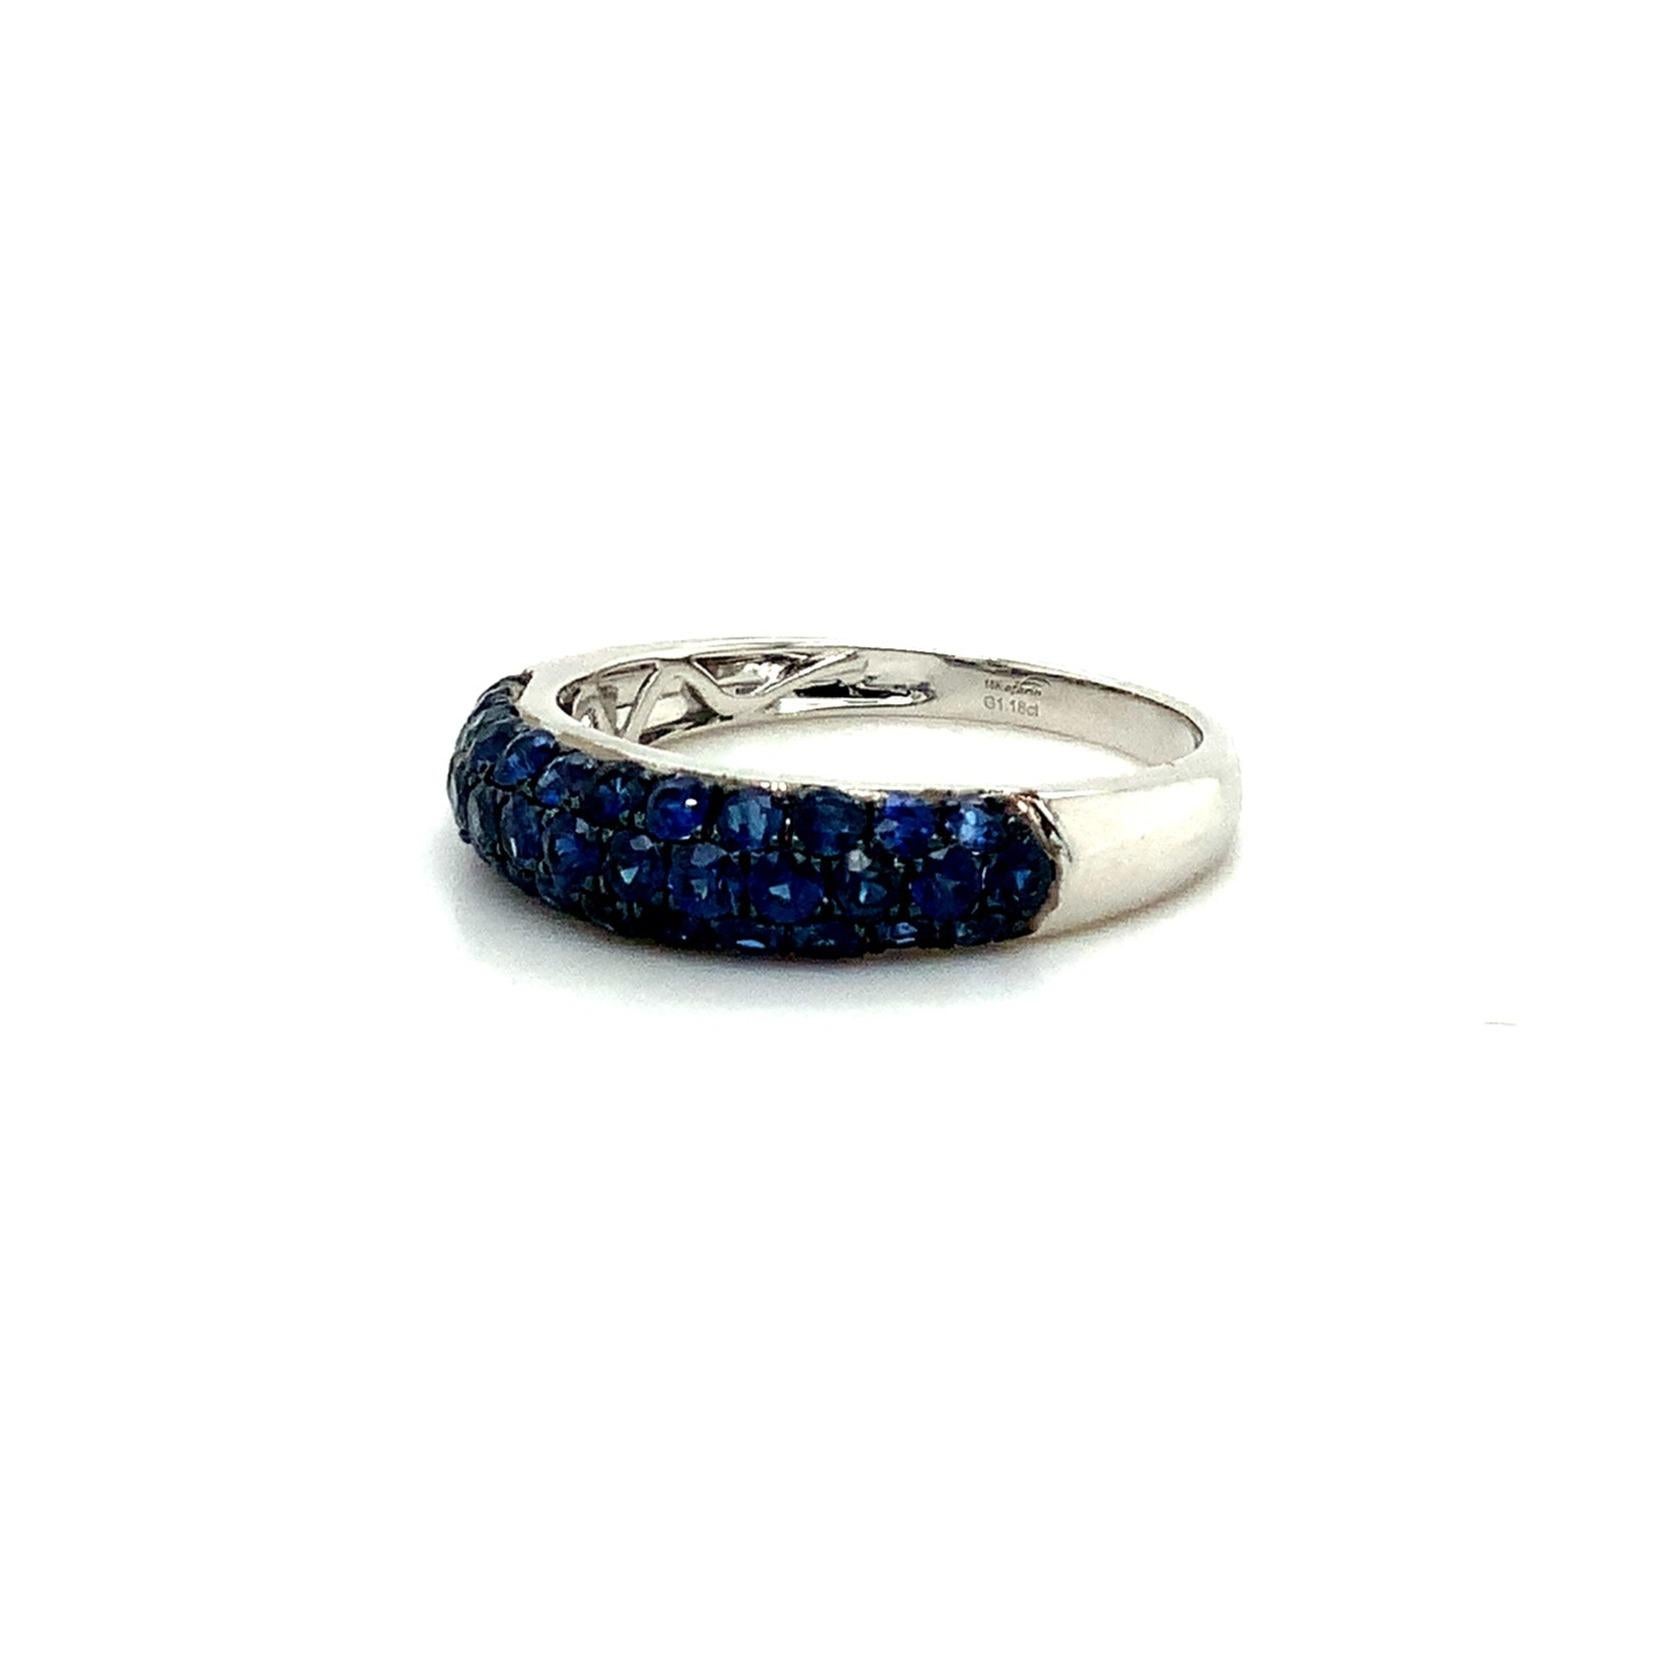 Taille brillant The Collective 3 Row of Pavé Blue Sapphire Band Set in 18k White Gold Finish en vente